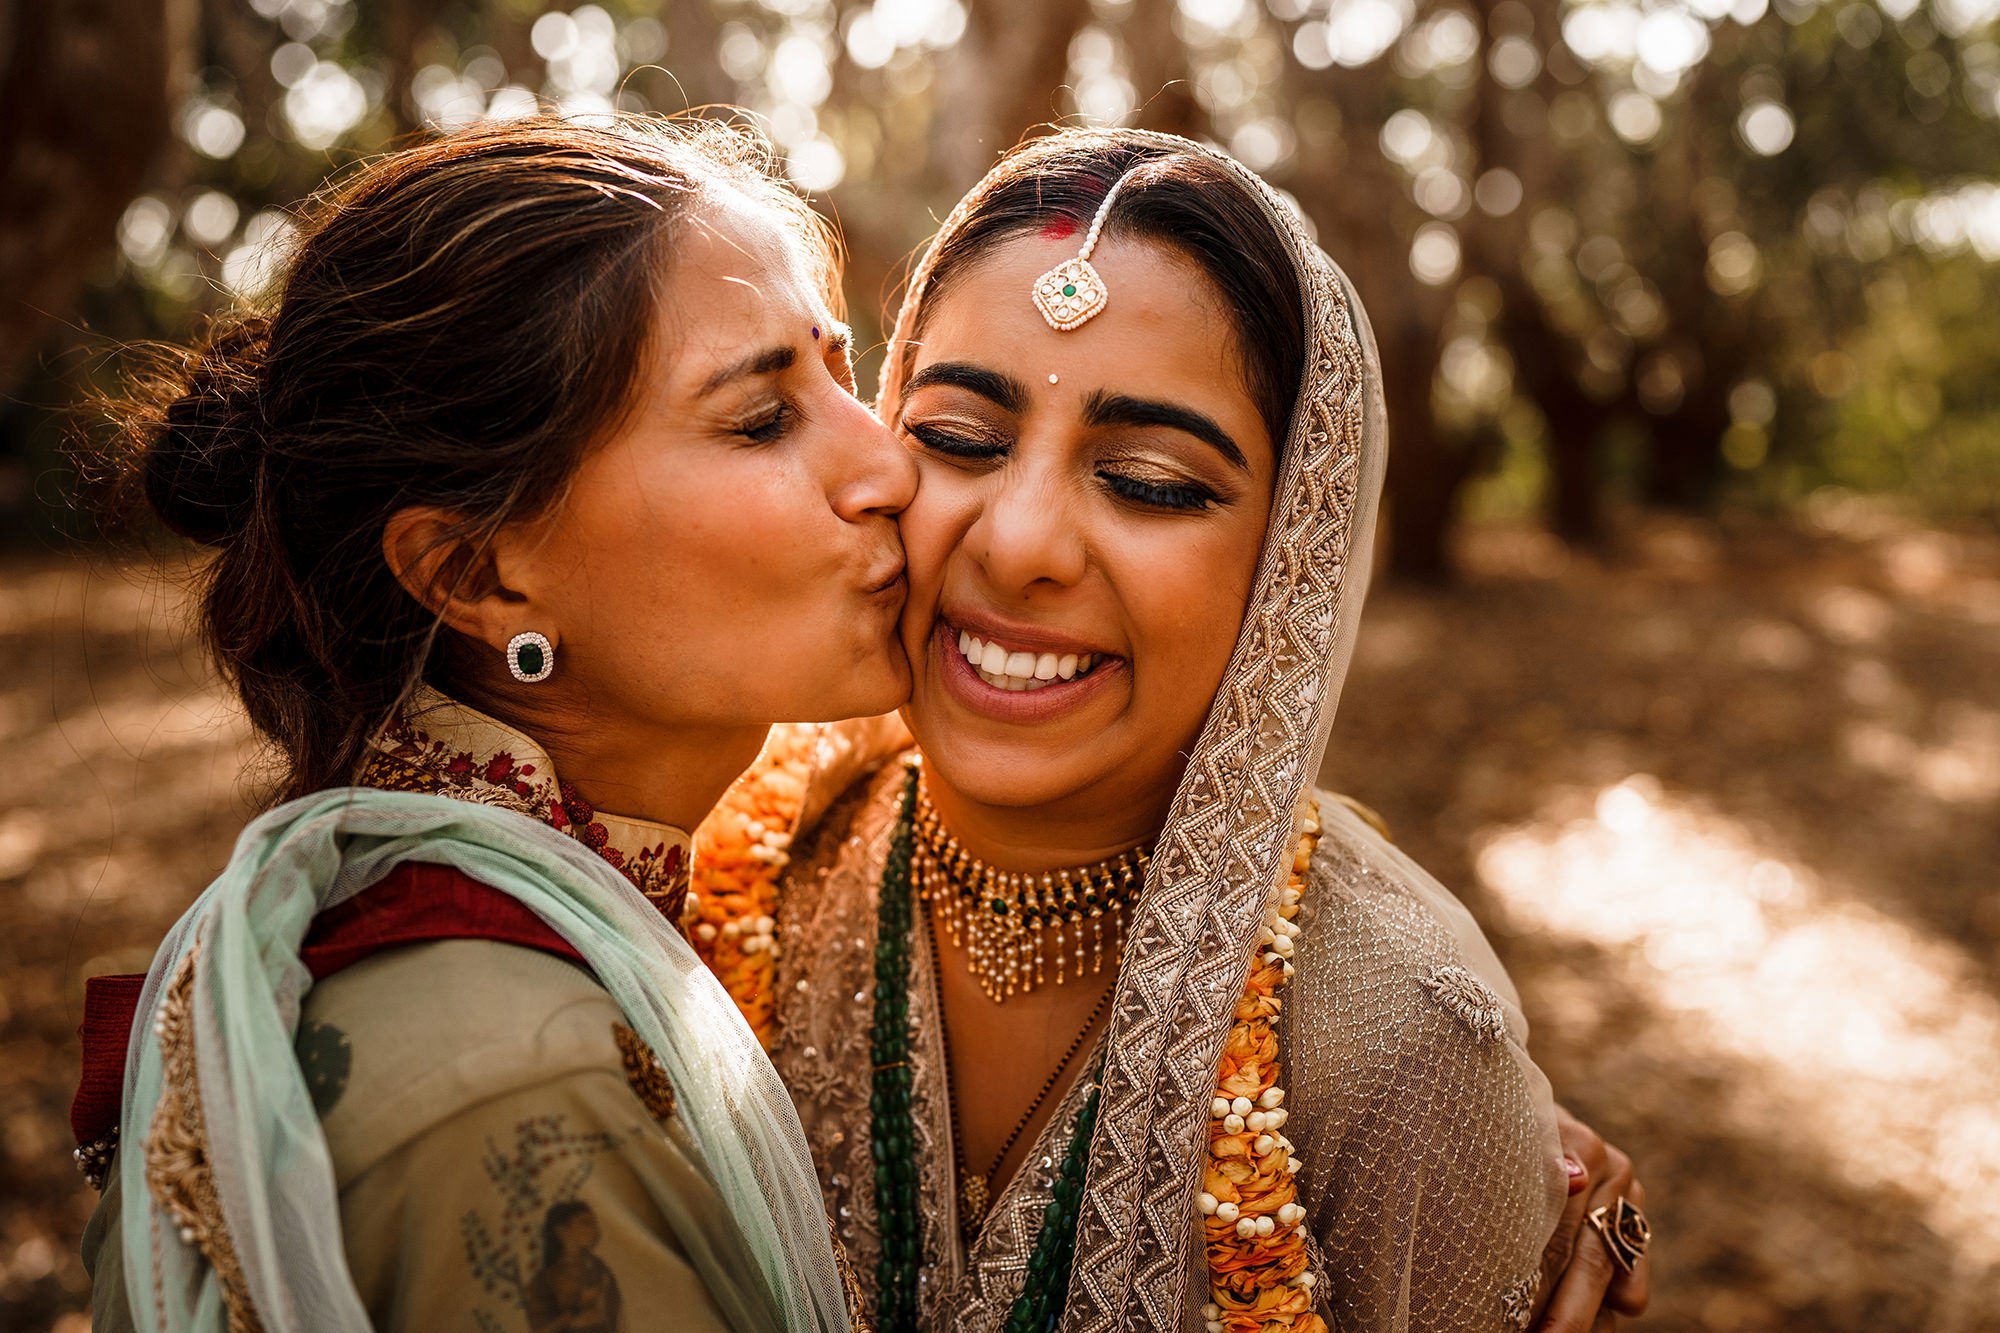 A kiss on the cheek from a wedding guest at an Asian wedding. Image by Stephen Walker Photography